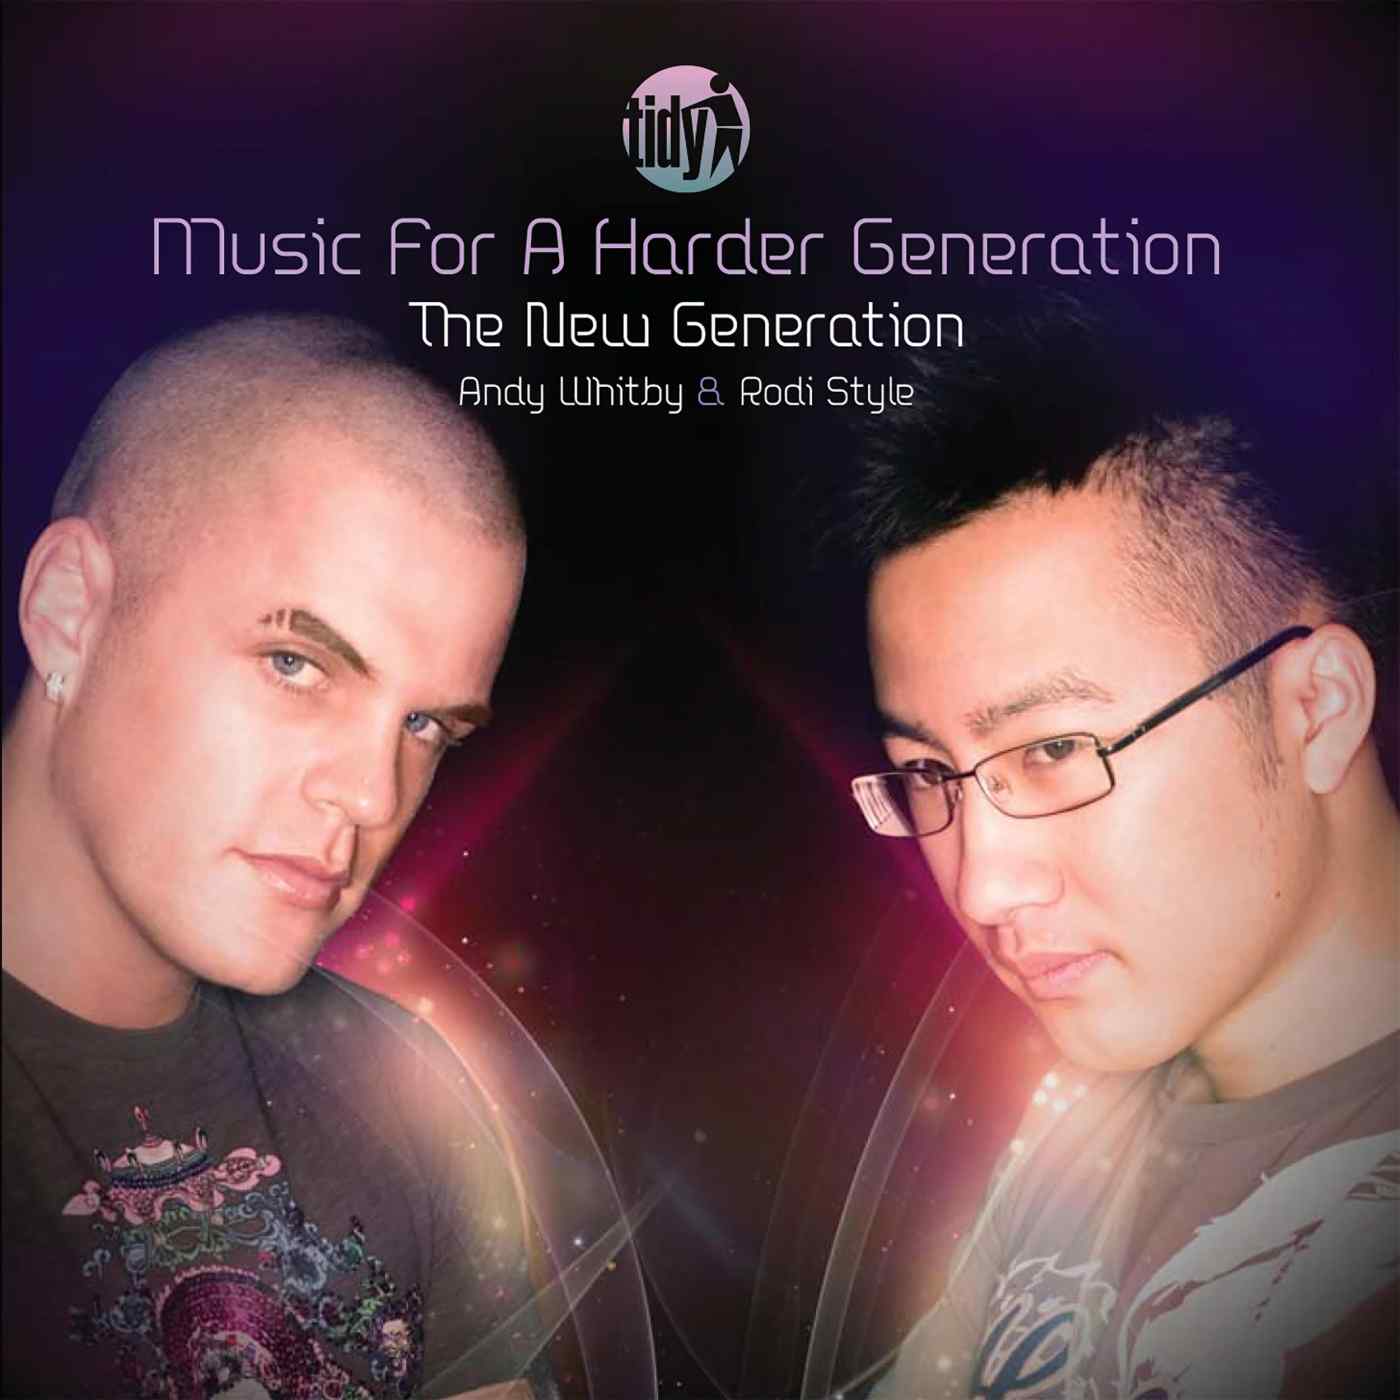 Music For A Harder Generation - Andy Whitby & Rodi Style